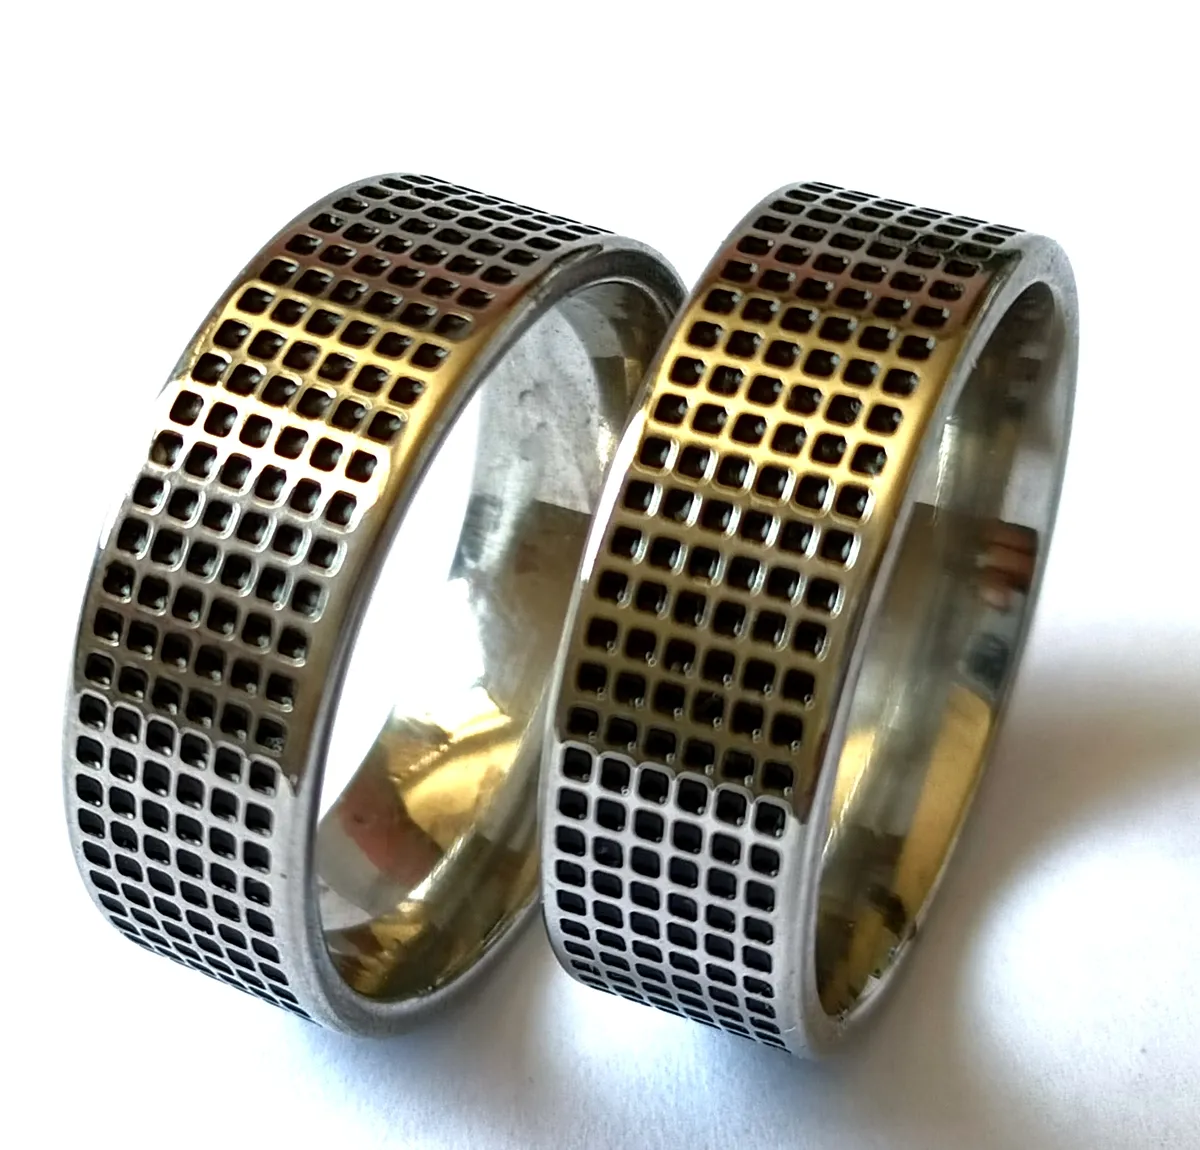 36pcs Men's Punk Bands Ring Male Female 8mm Comfort-fit Stainless Steel Rings Black Oil Filled Man Jewelry Whole lots301V